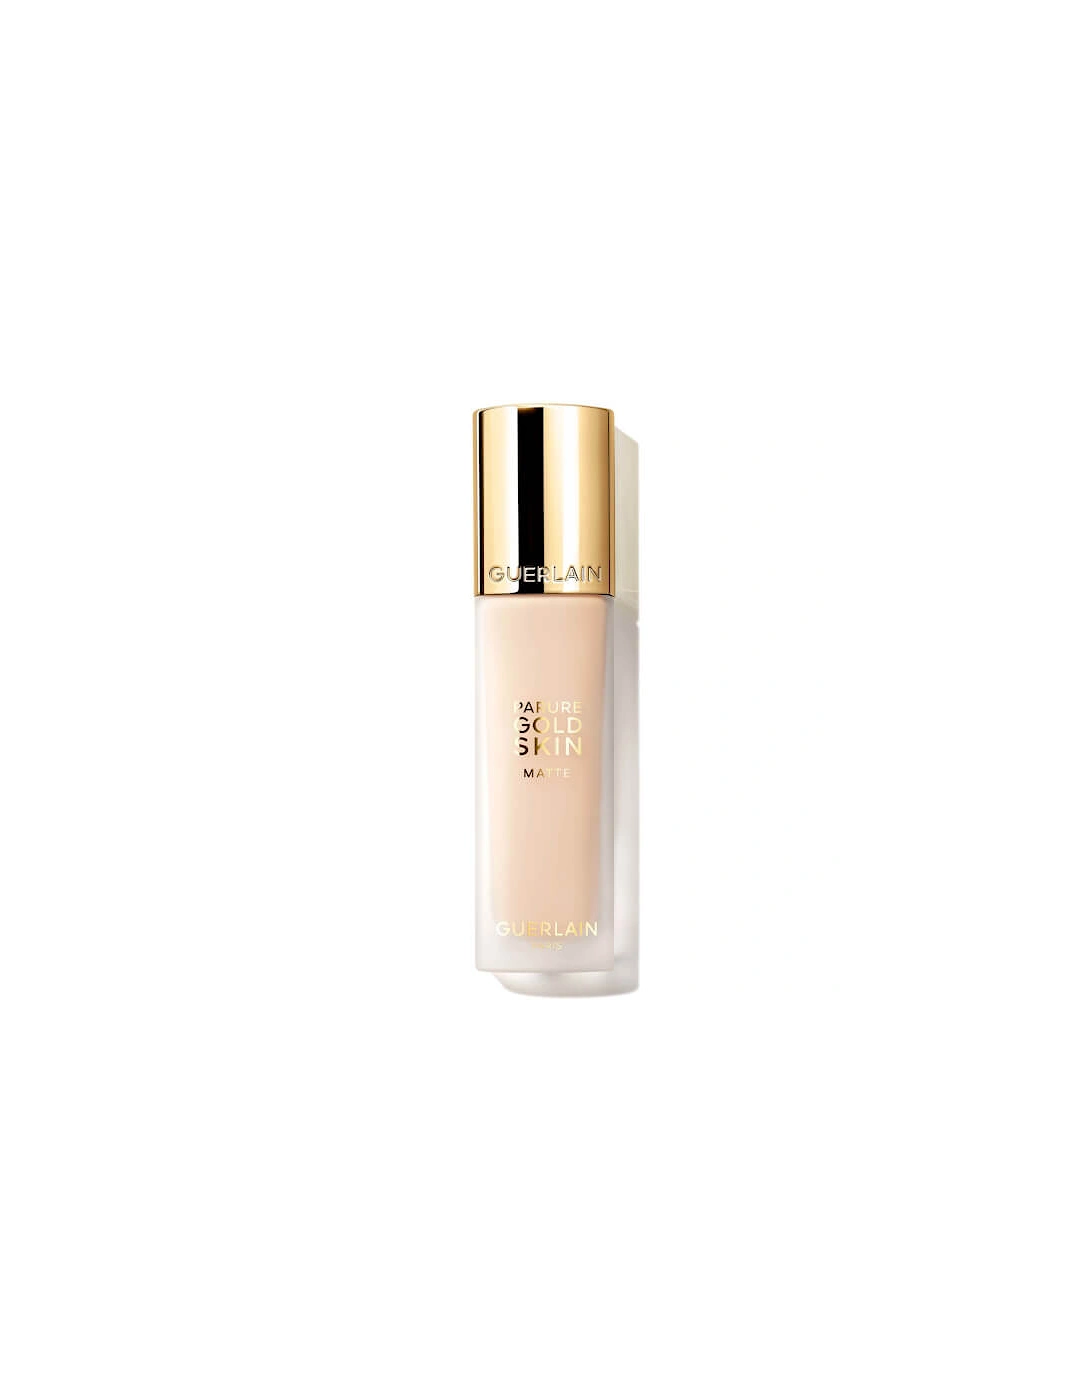 Parure Gold Skin 24H No-Transfer High Perfection Foundation - 0C Cool / Rosé, 2 of 1